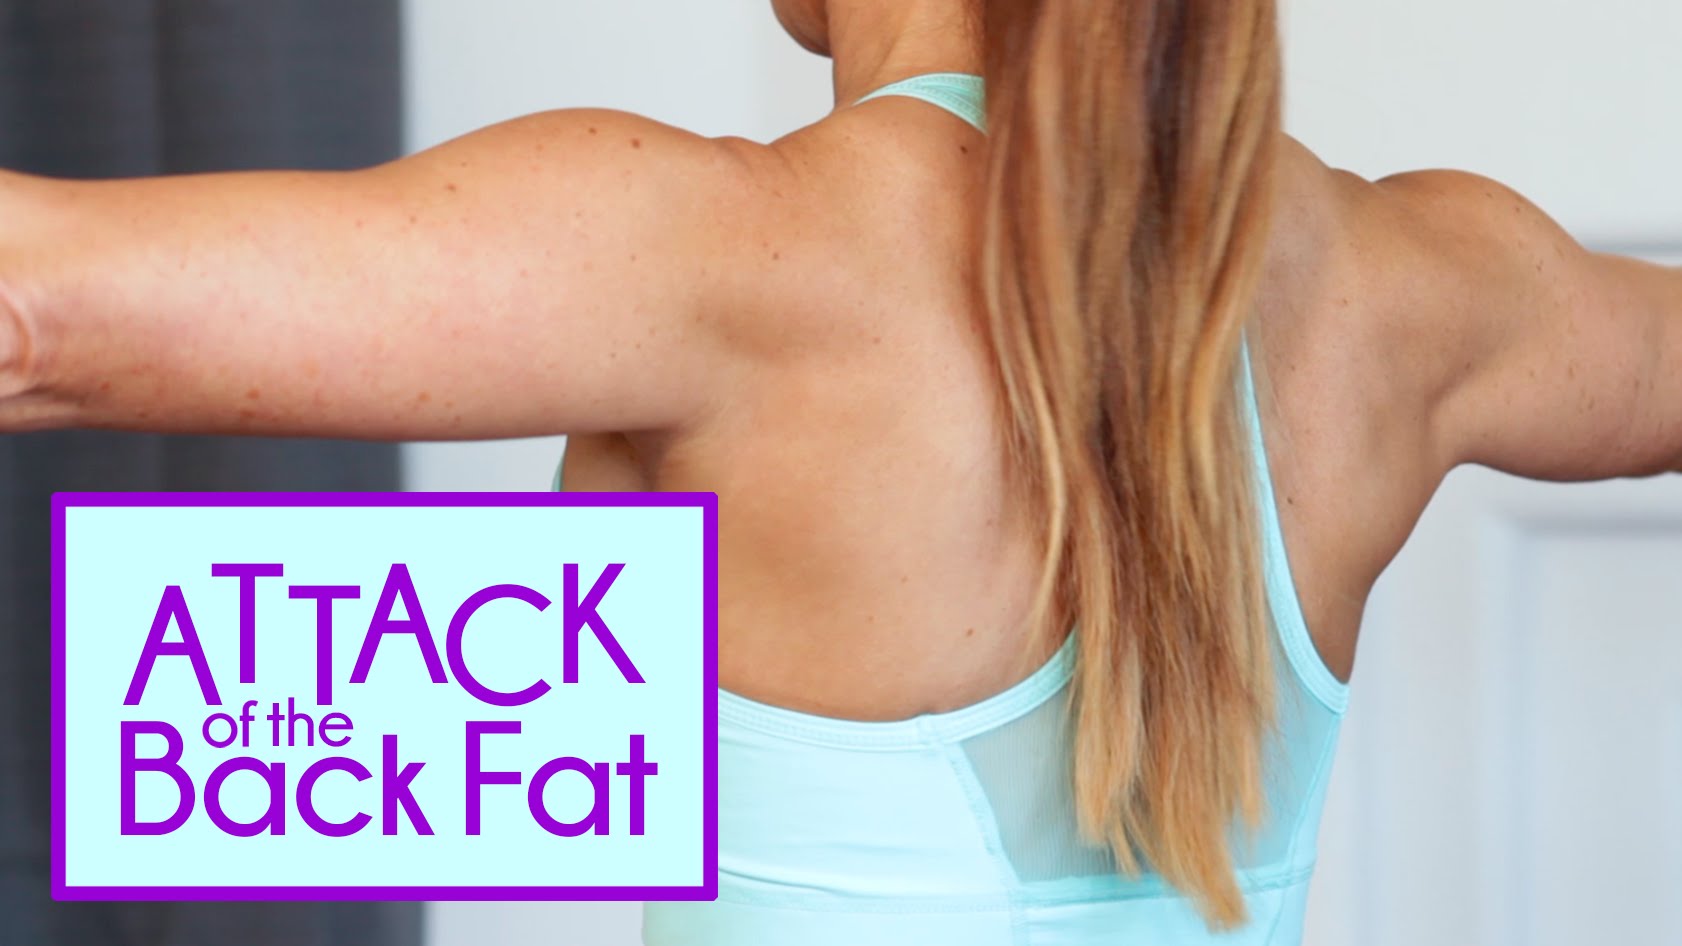 Attacking Back Fat - Exercises (Video) - Natalie Jill Fitness